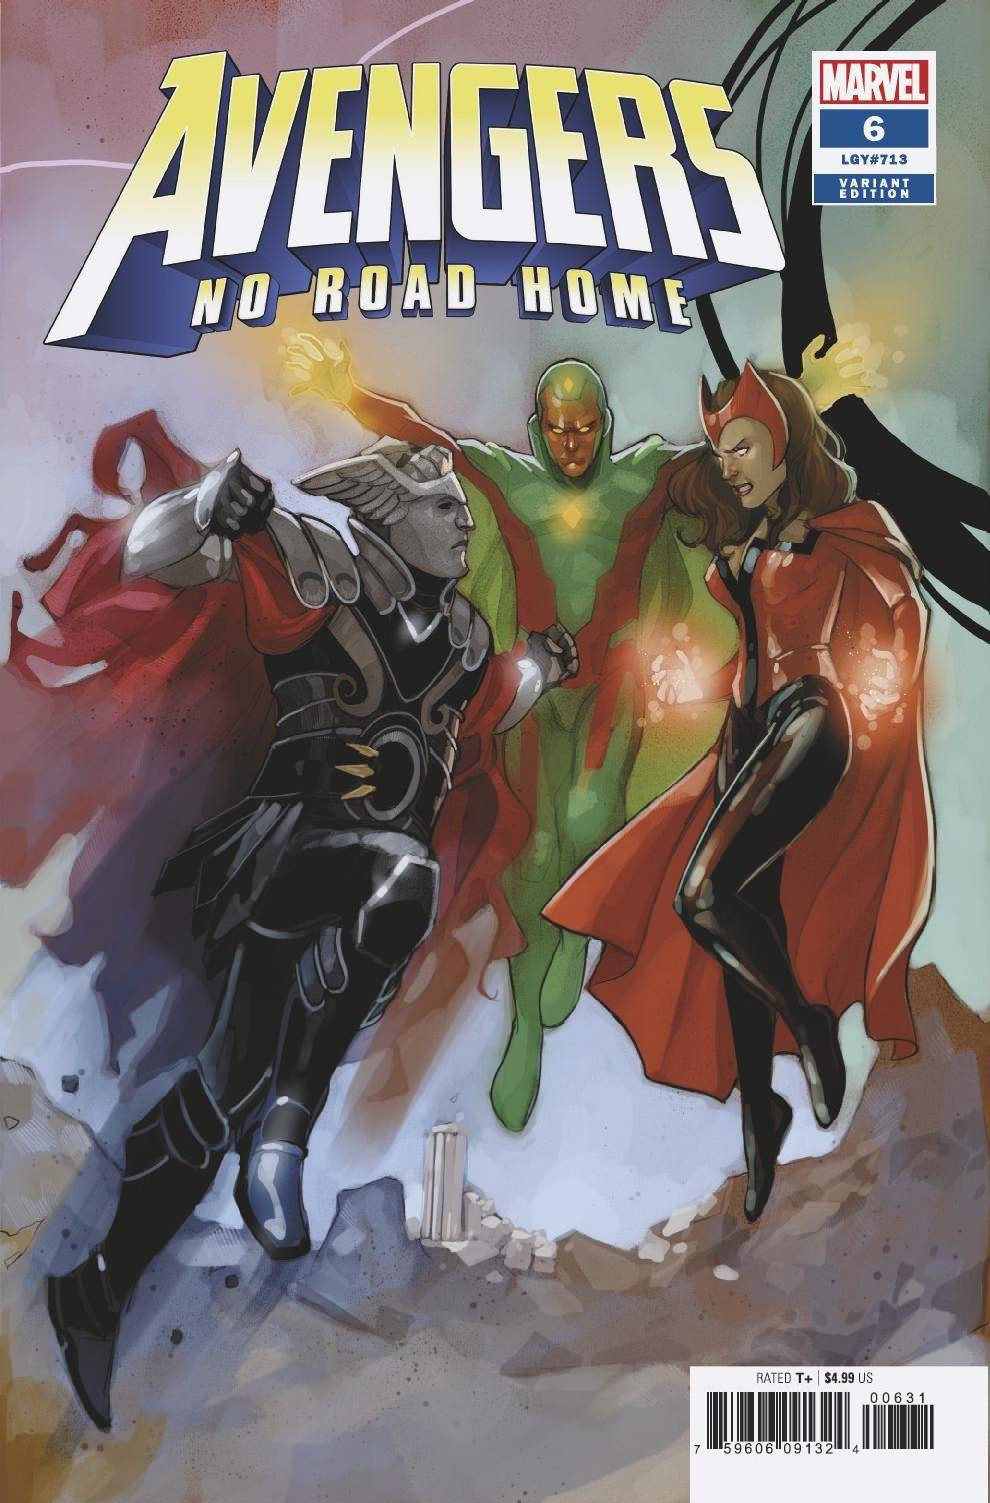 AVENGERS NO ROAD HOME #6 (OF 10) CONNECTING VARIANT 2019